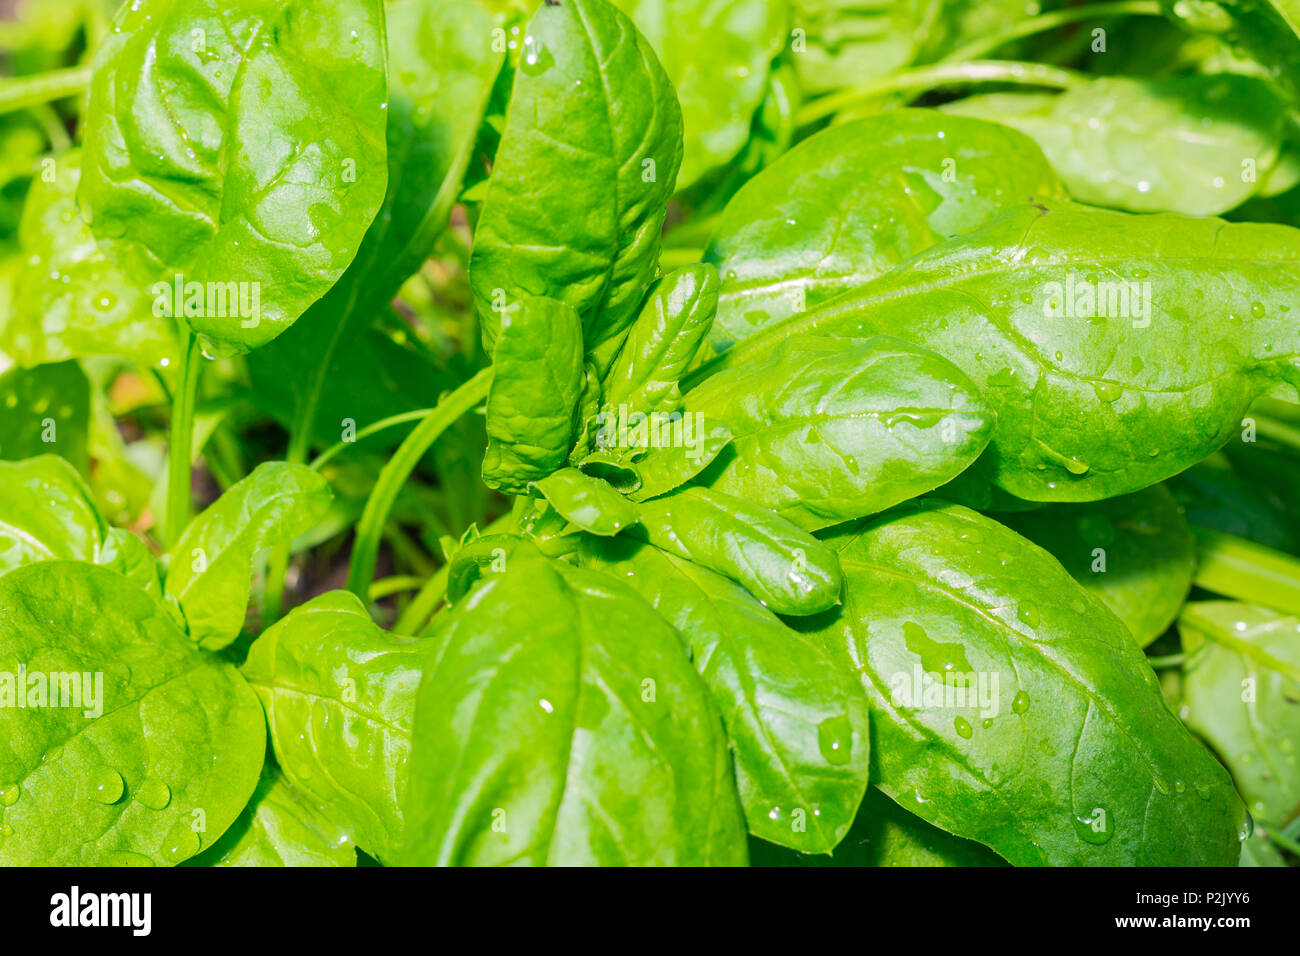 Green spinach leaves growing in greenhouse with waterdrops in a bright, sunny day Stock Photo